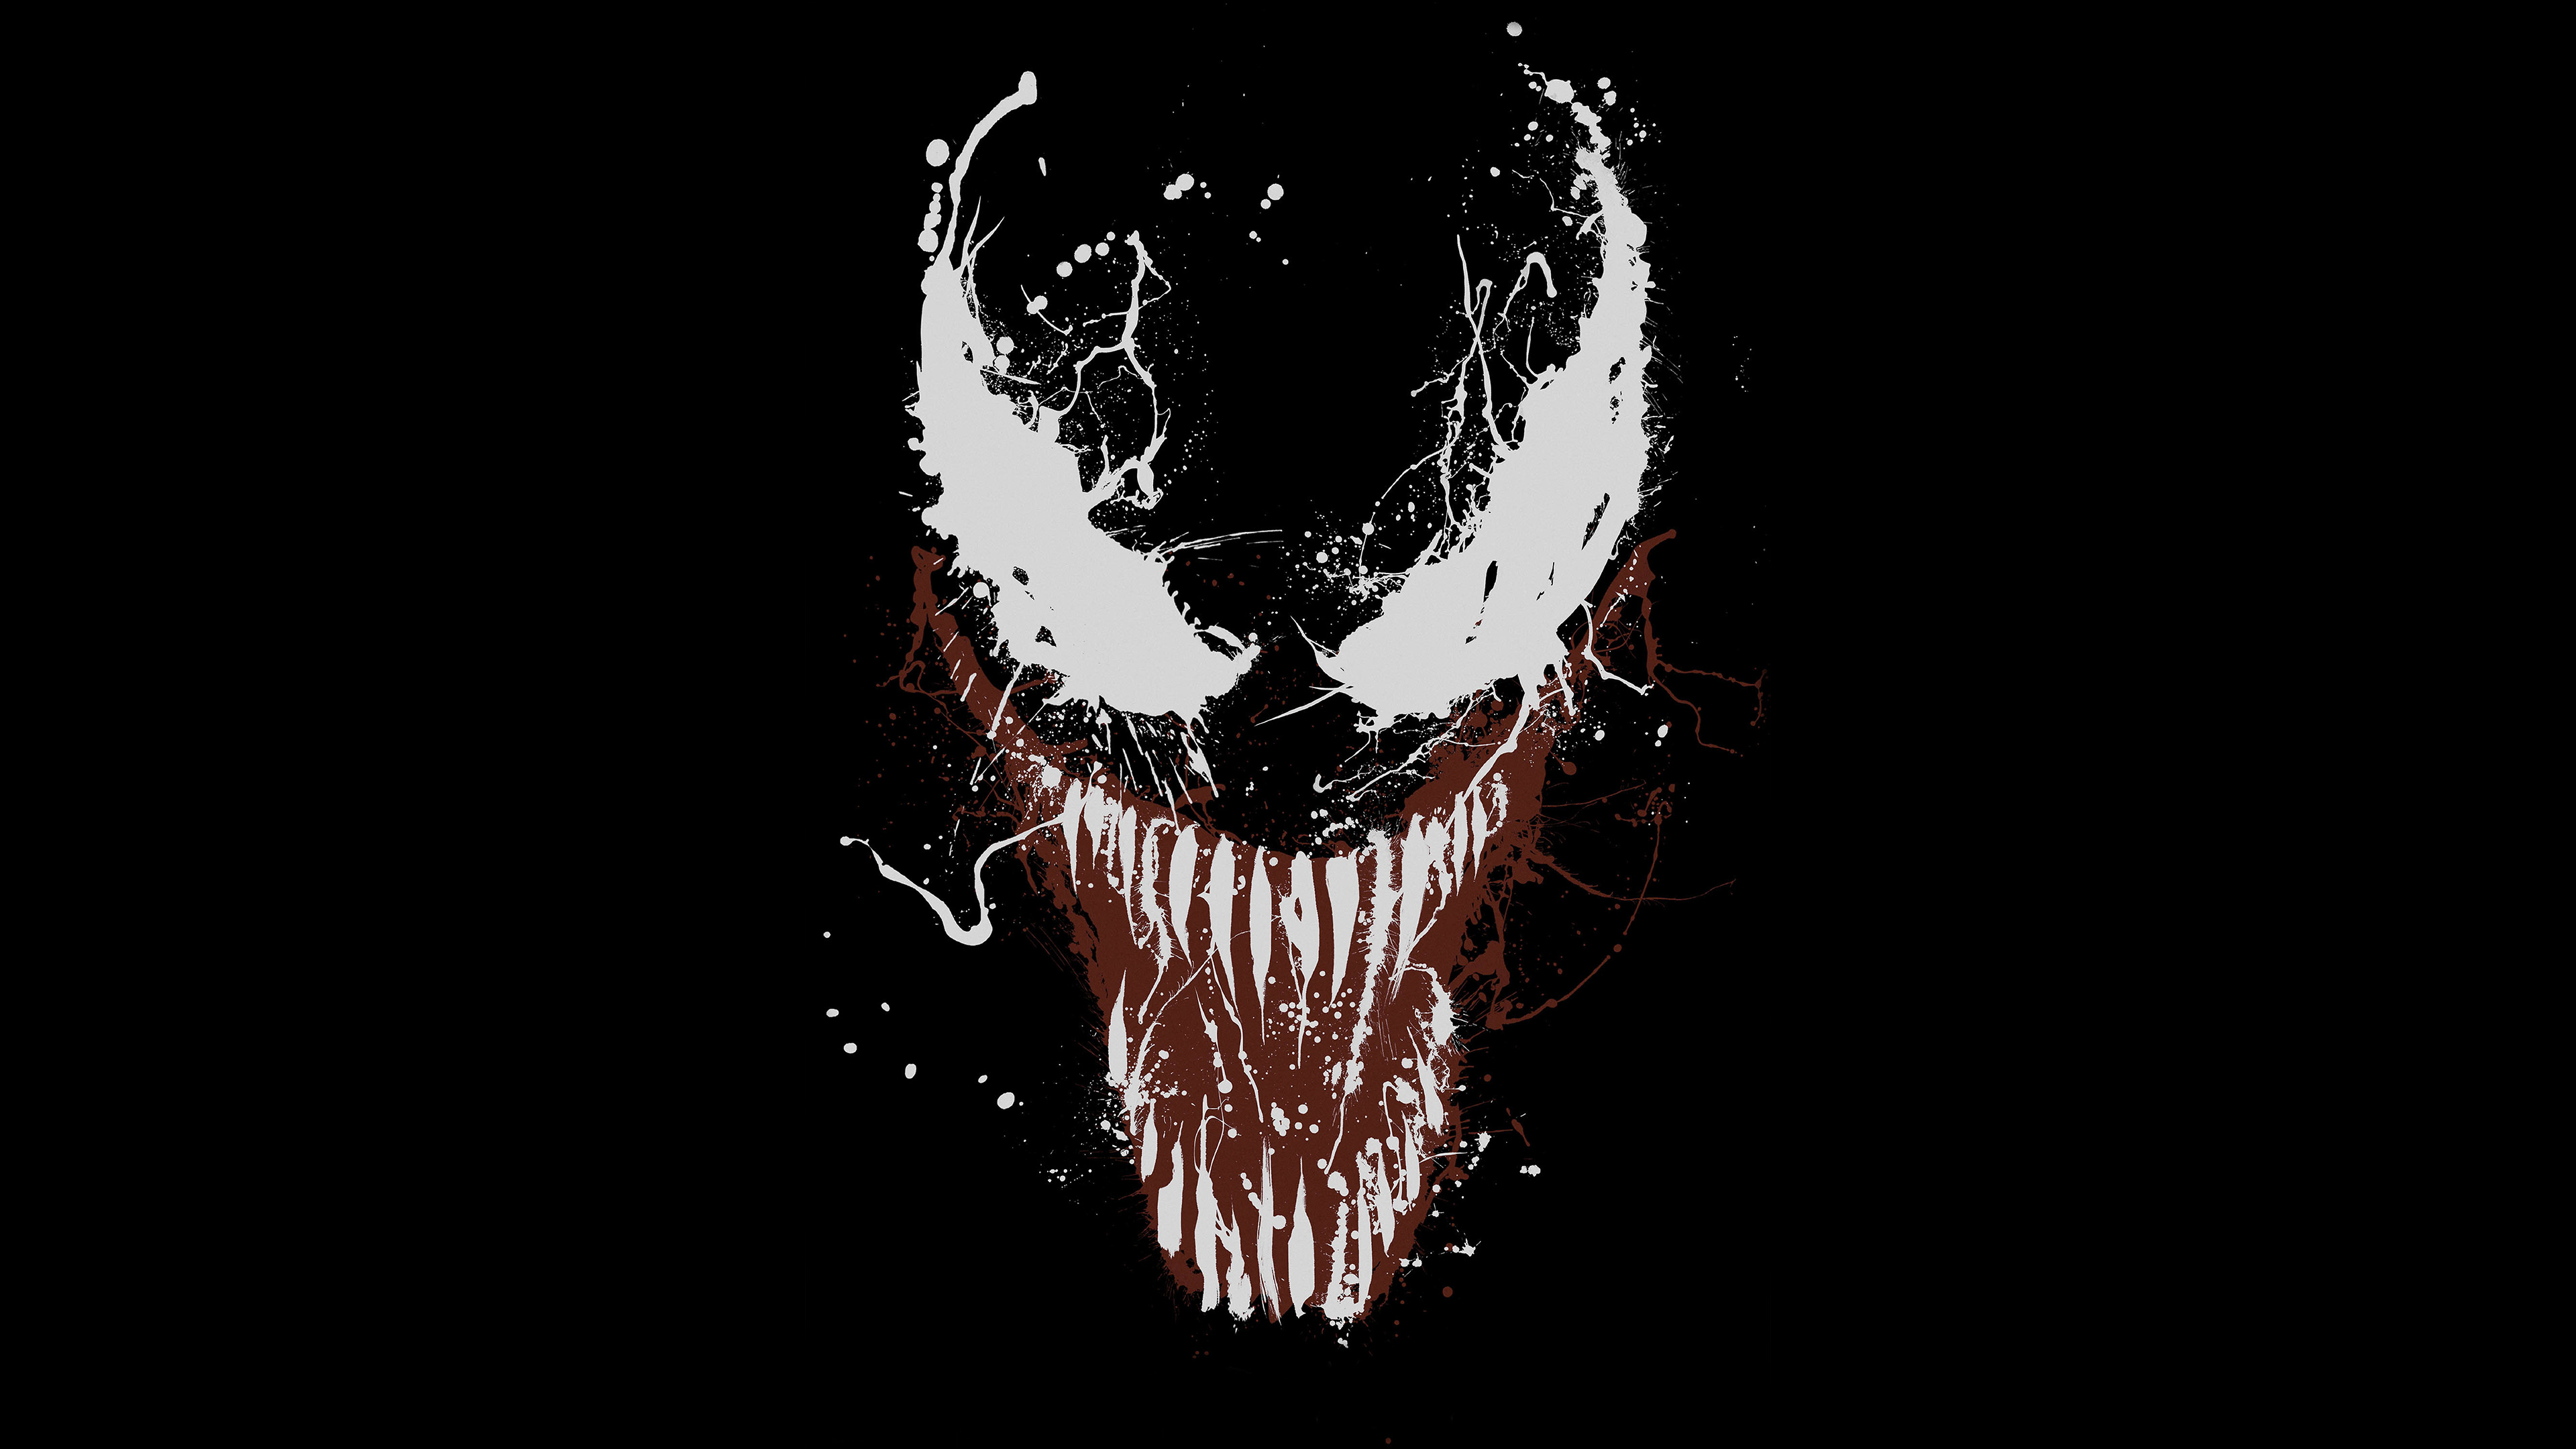 Venom Movie Poster 2018, HD Movies, 4k Wallpapers, Images ...